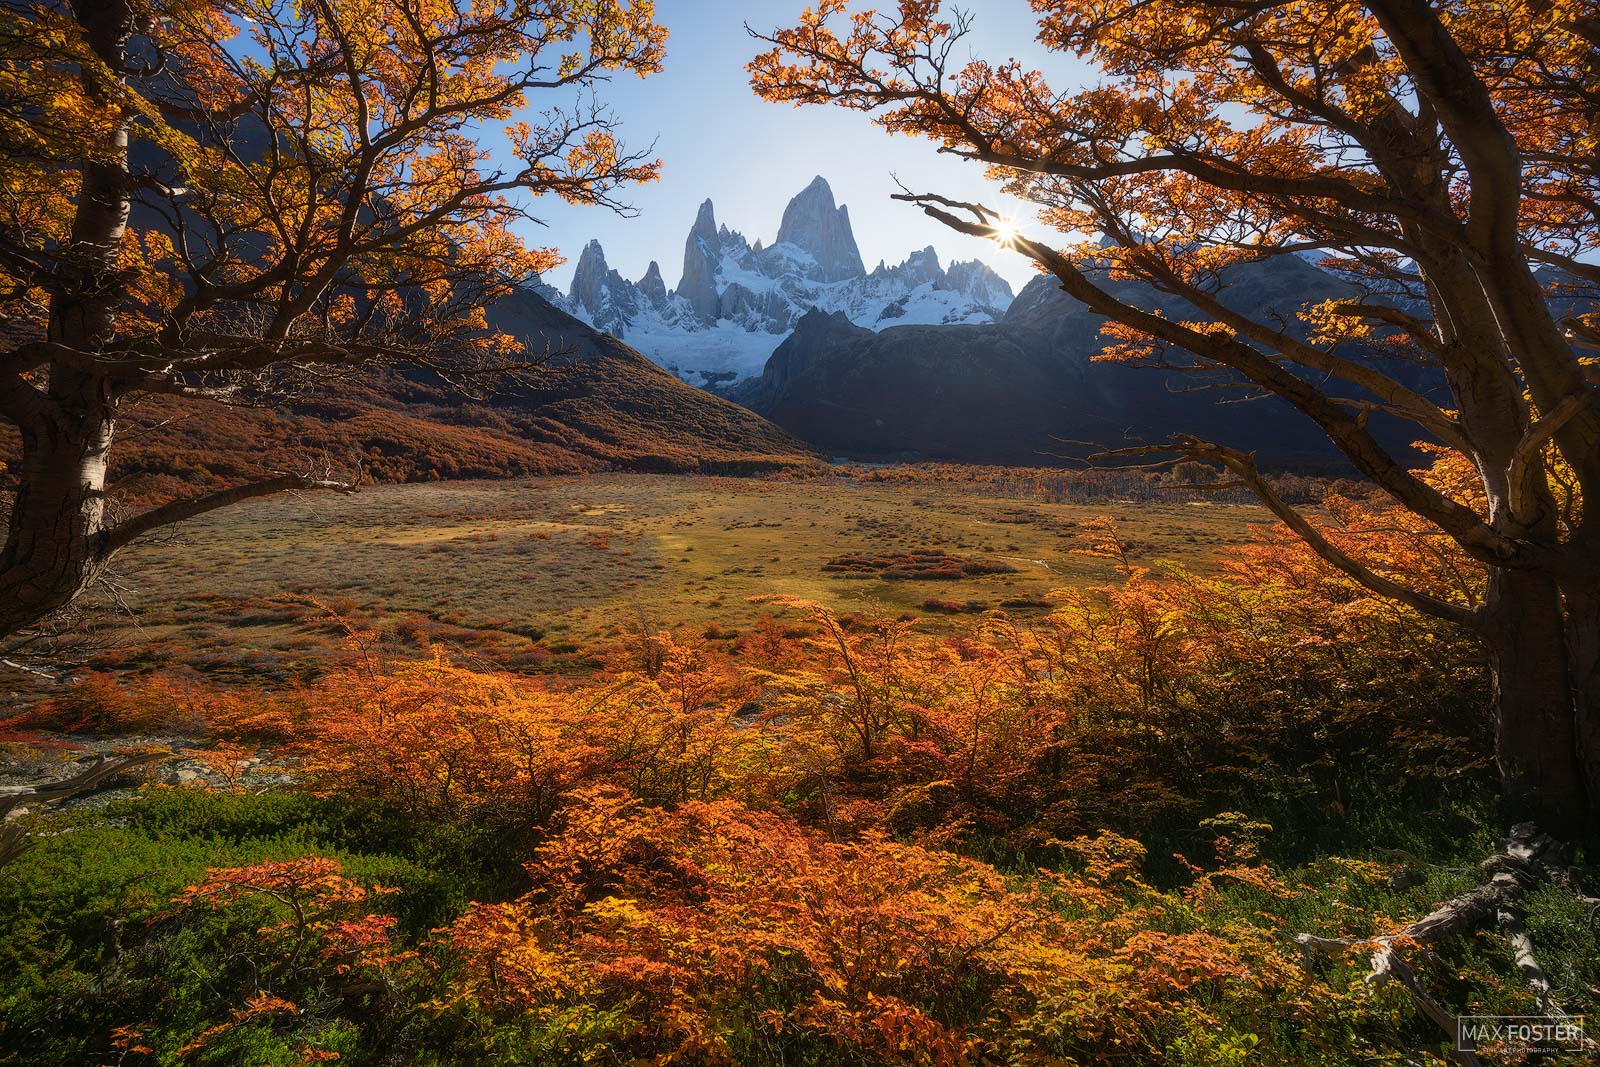 Elevate your walls with The Culmination, Max Foster's limited edition photographic print of Mount Fitz Roy in Los Glaciares National...